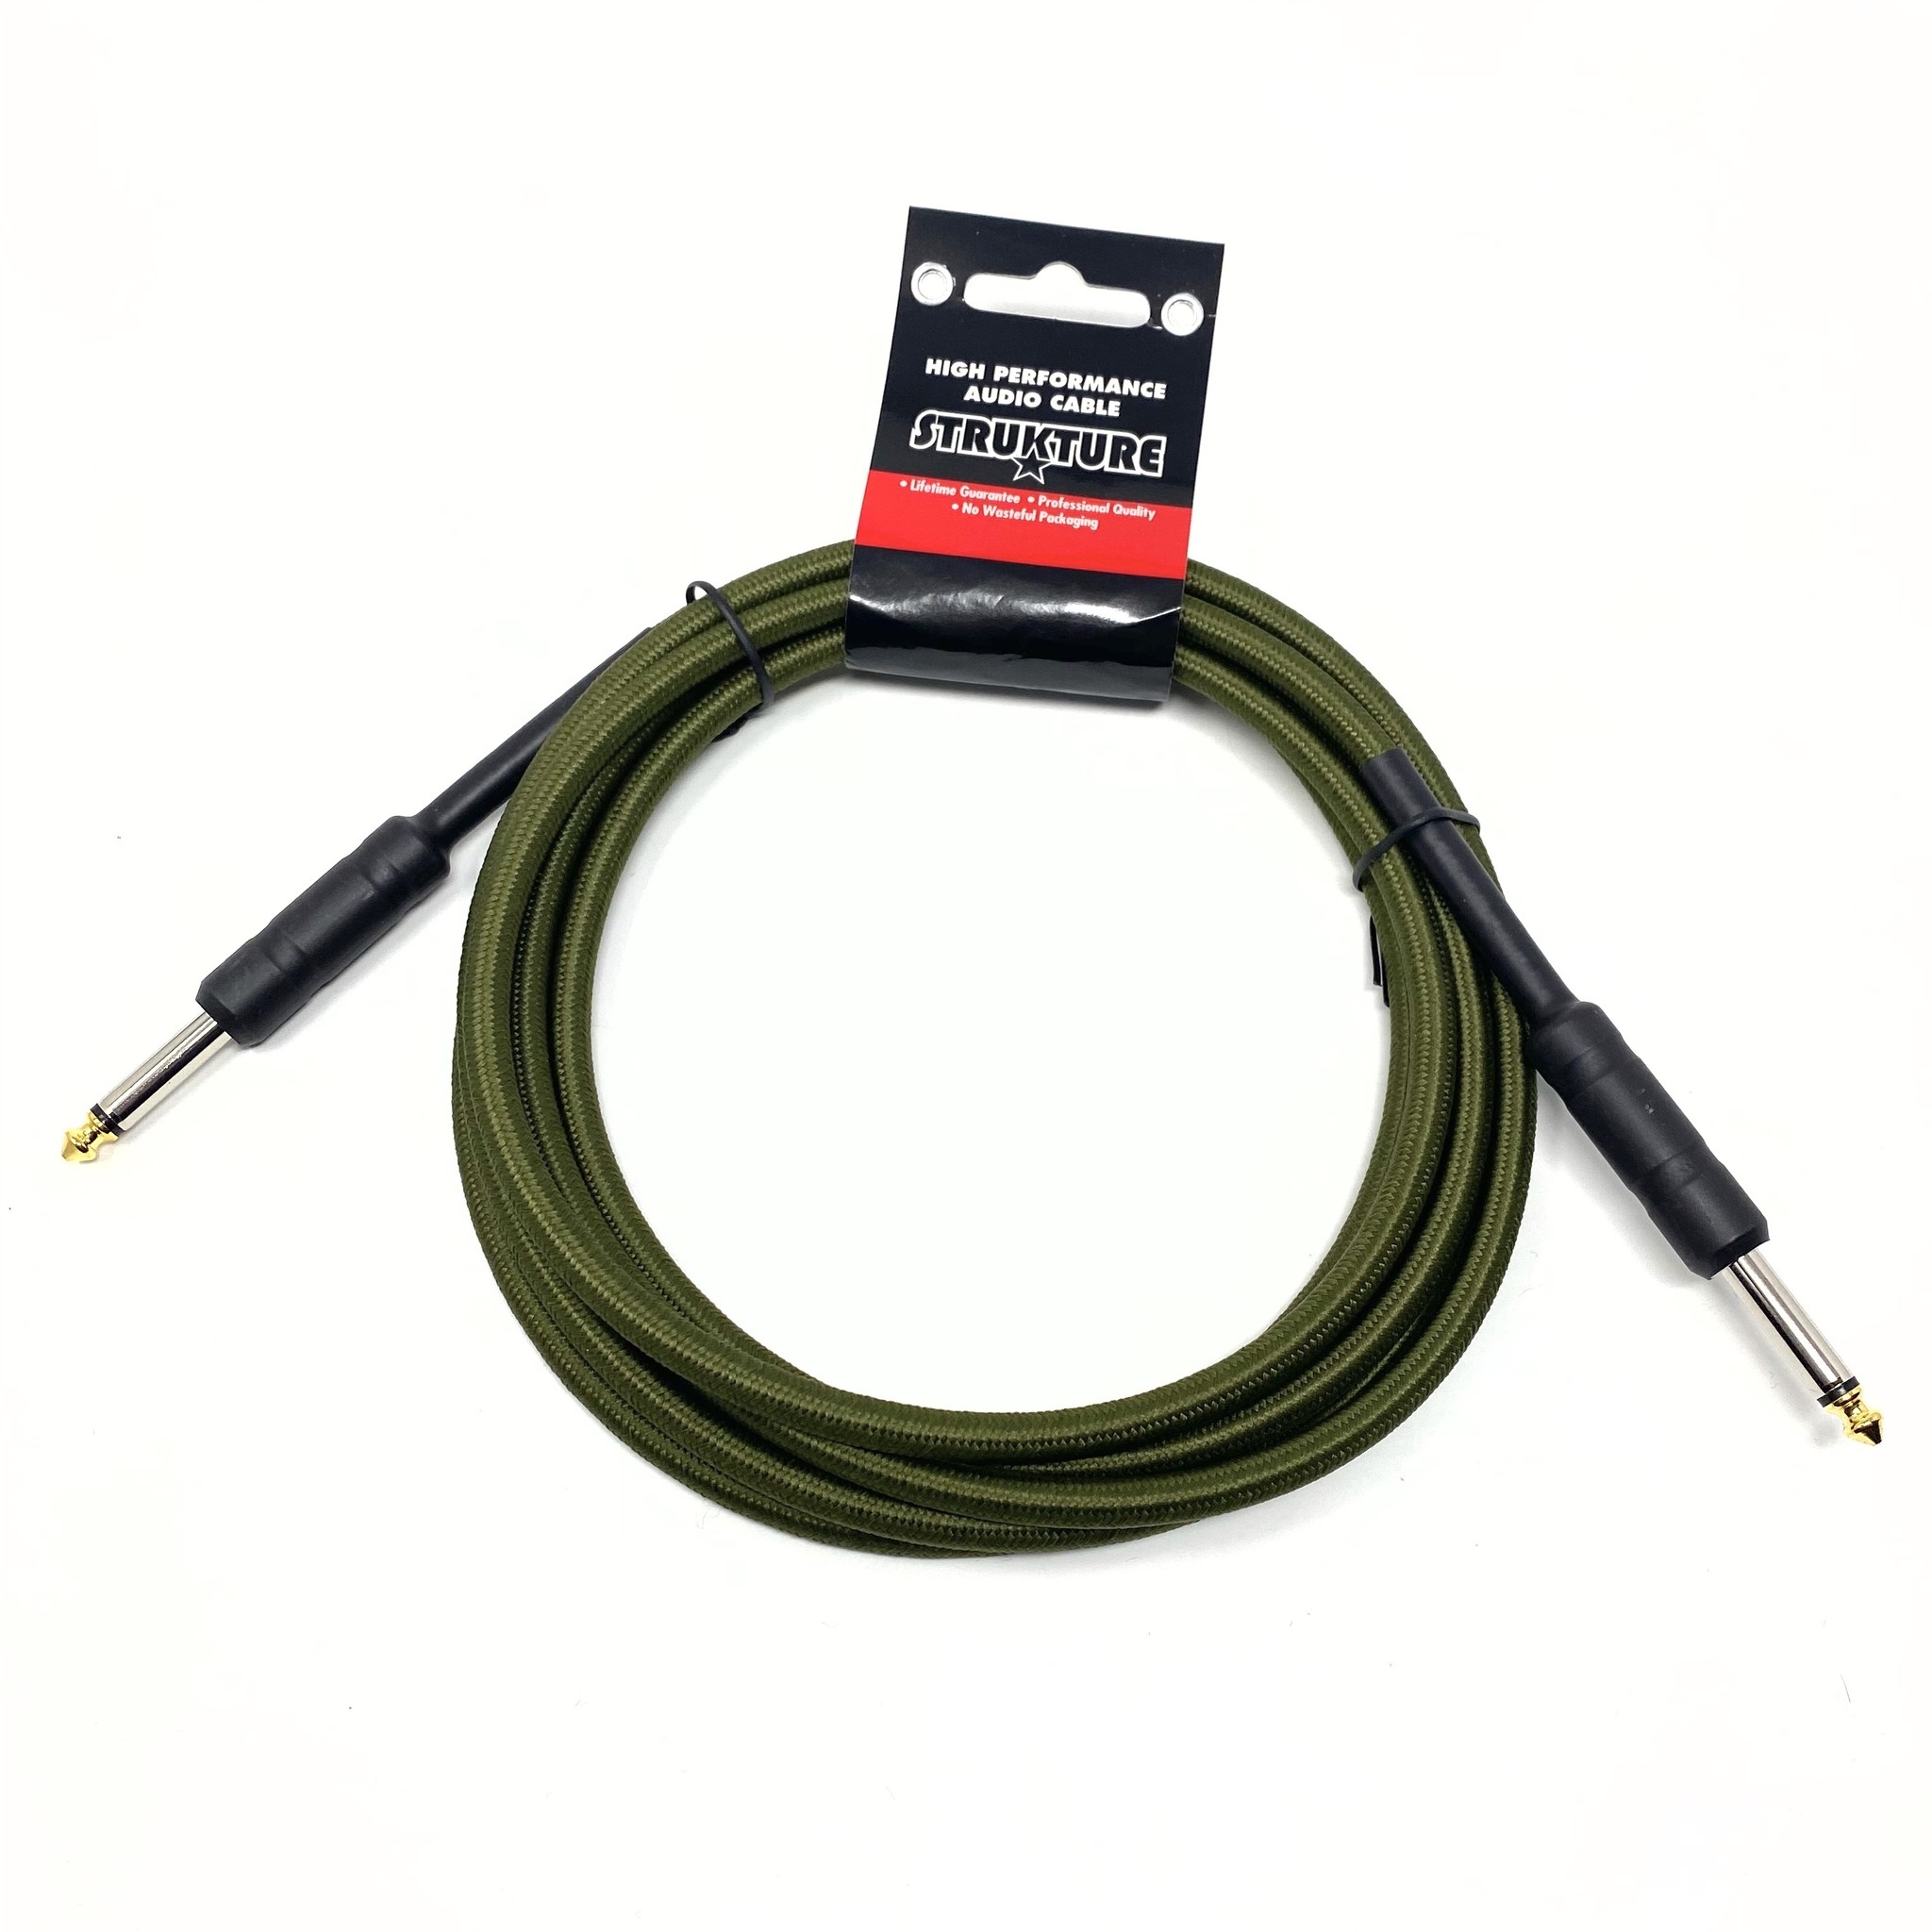 Strukture 10 ft Instrument Cable, Woven, Military Green, 1/4" (Latest version with new Black Wraps!)